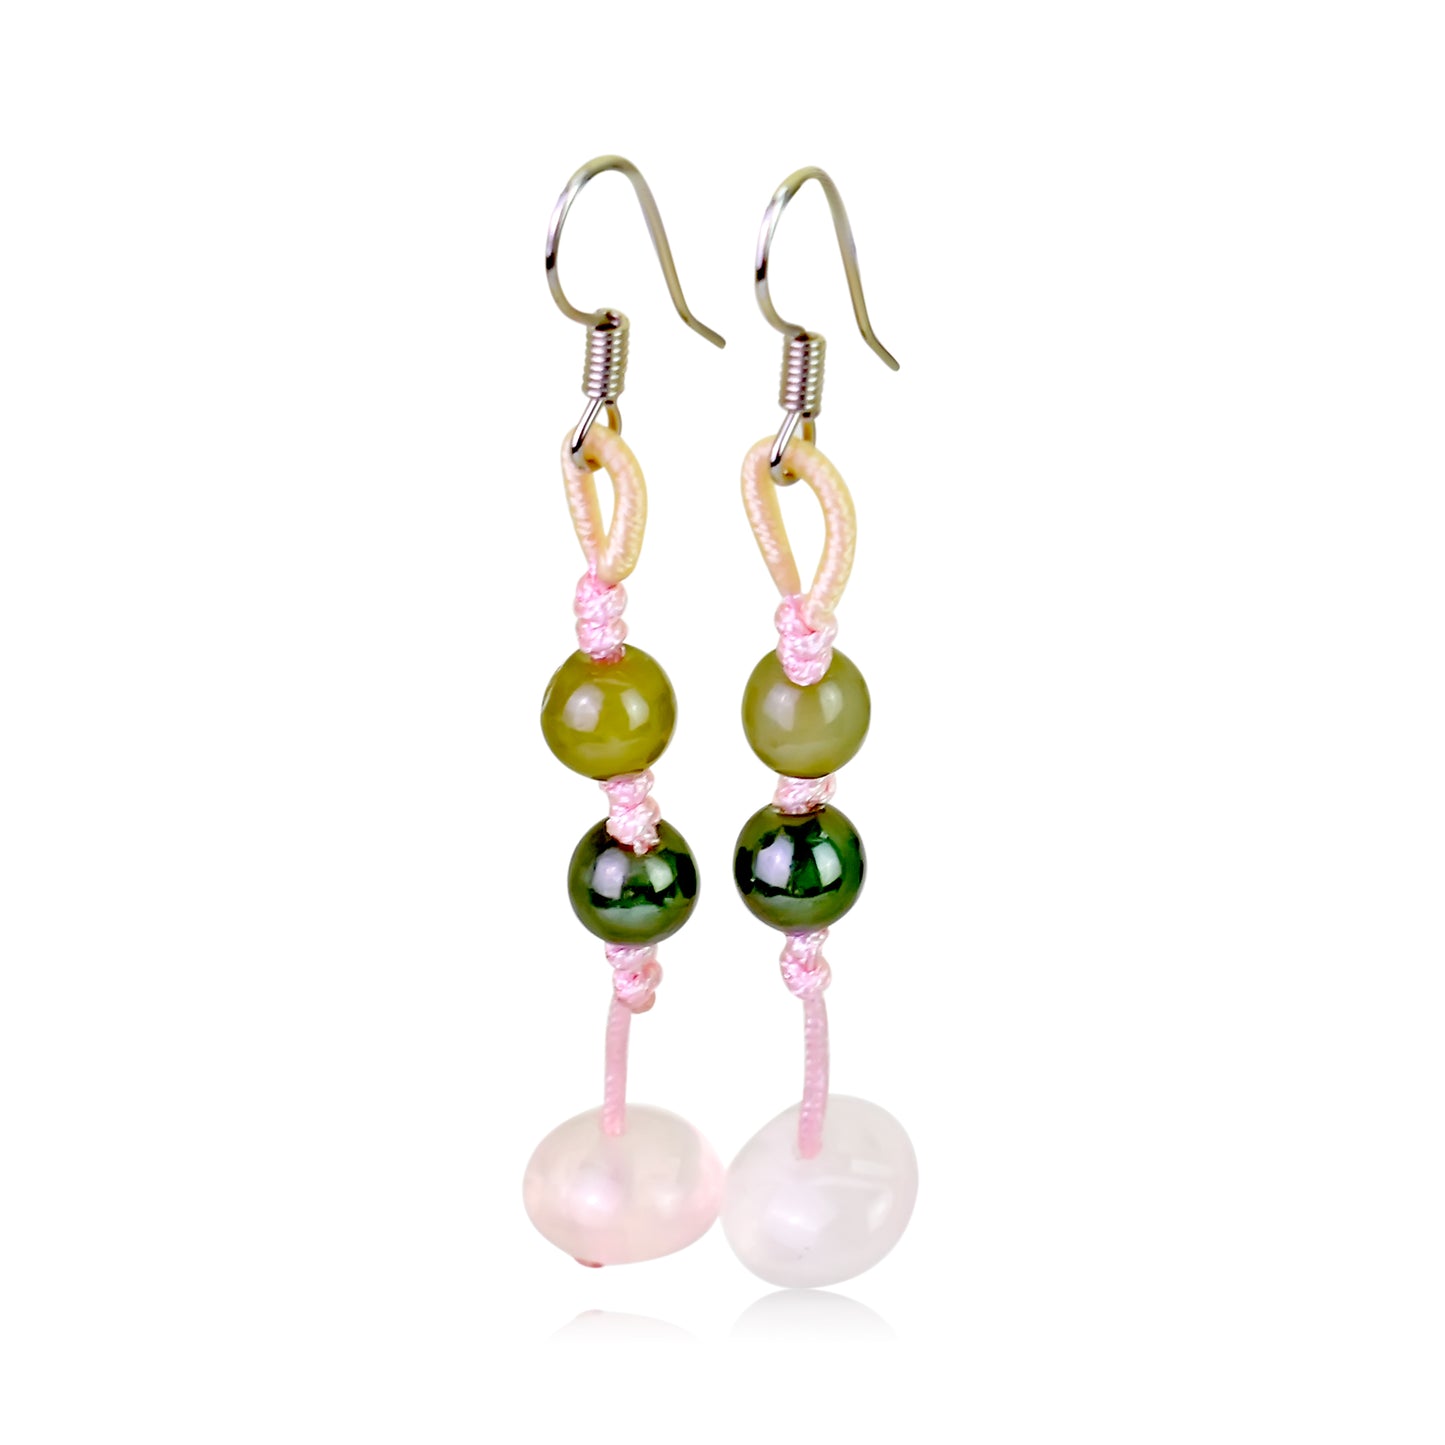 Get the Perfect Pair of Subtle Elegance with Spherical Beads Earrings made with Pink Cord